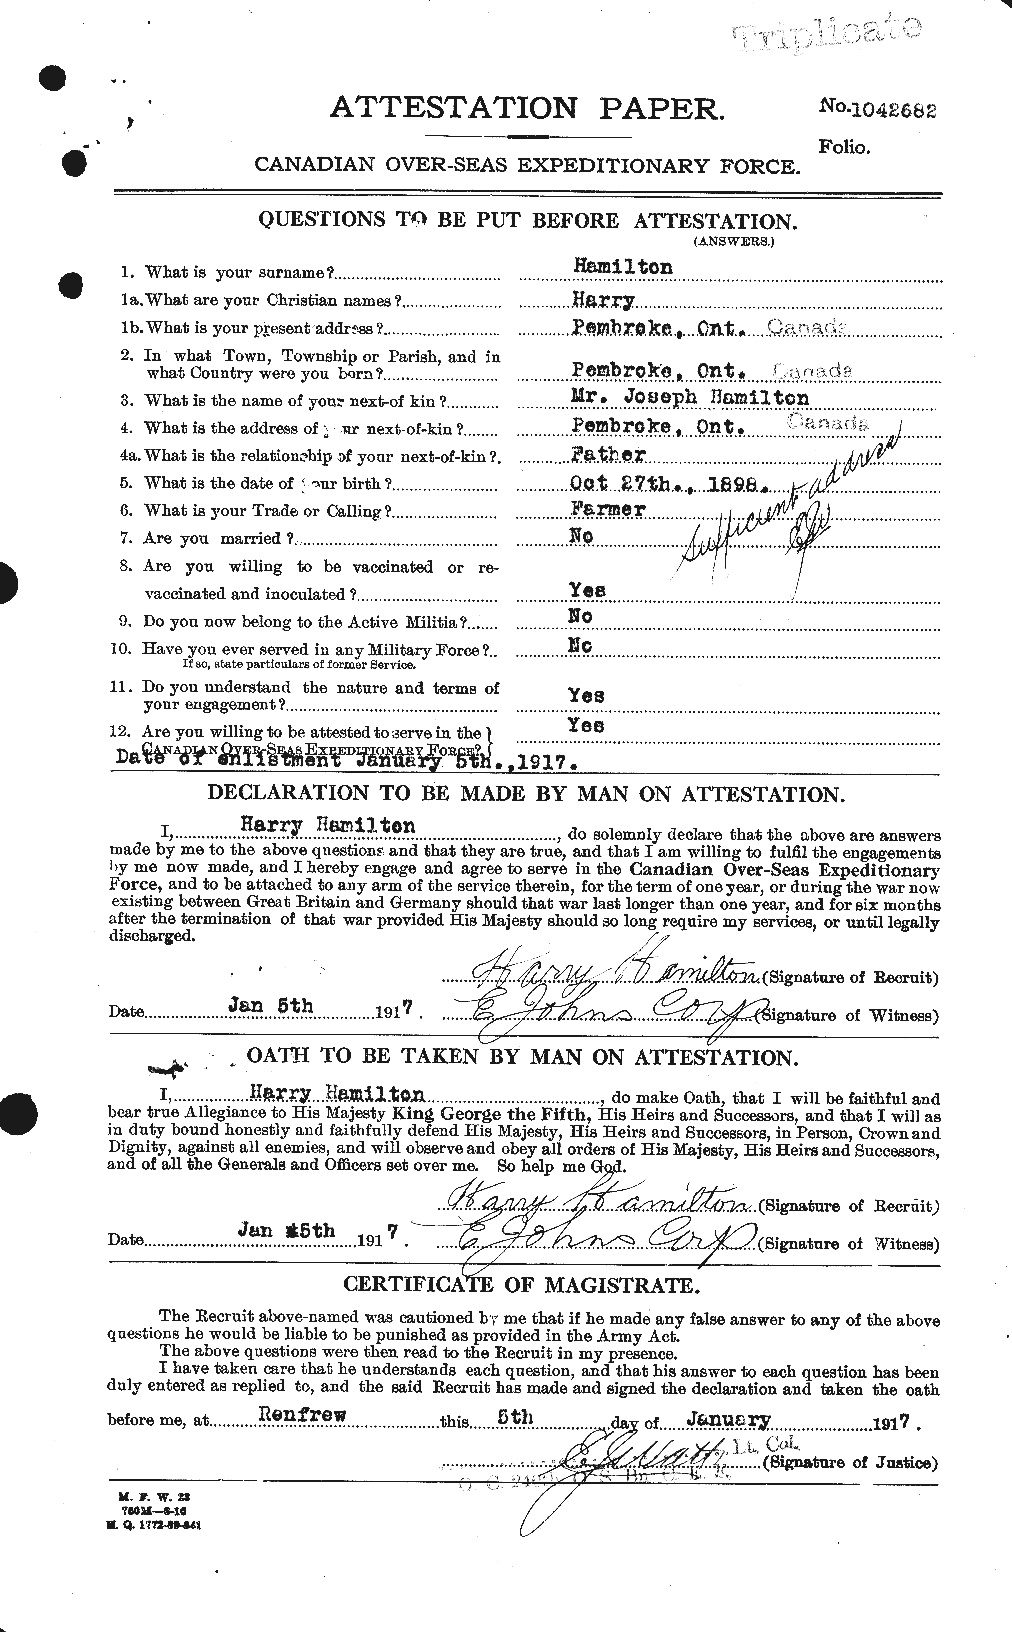 Personnel Records of the First World War - CEF 372503a